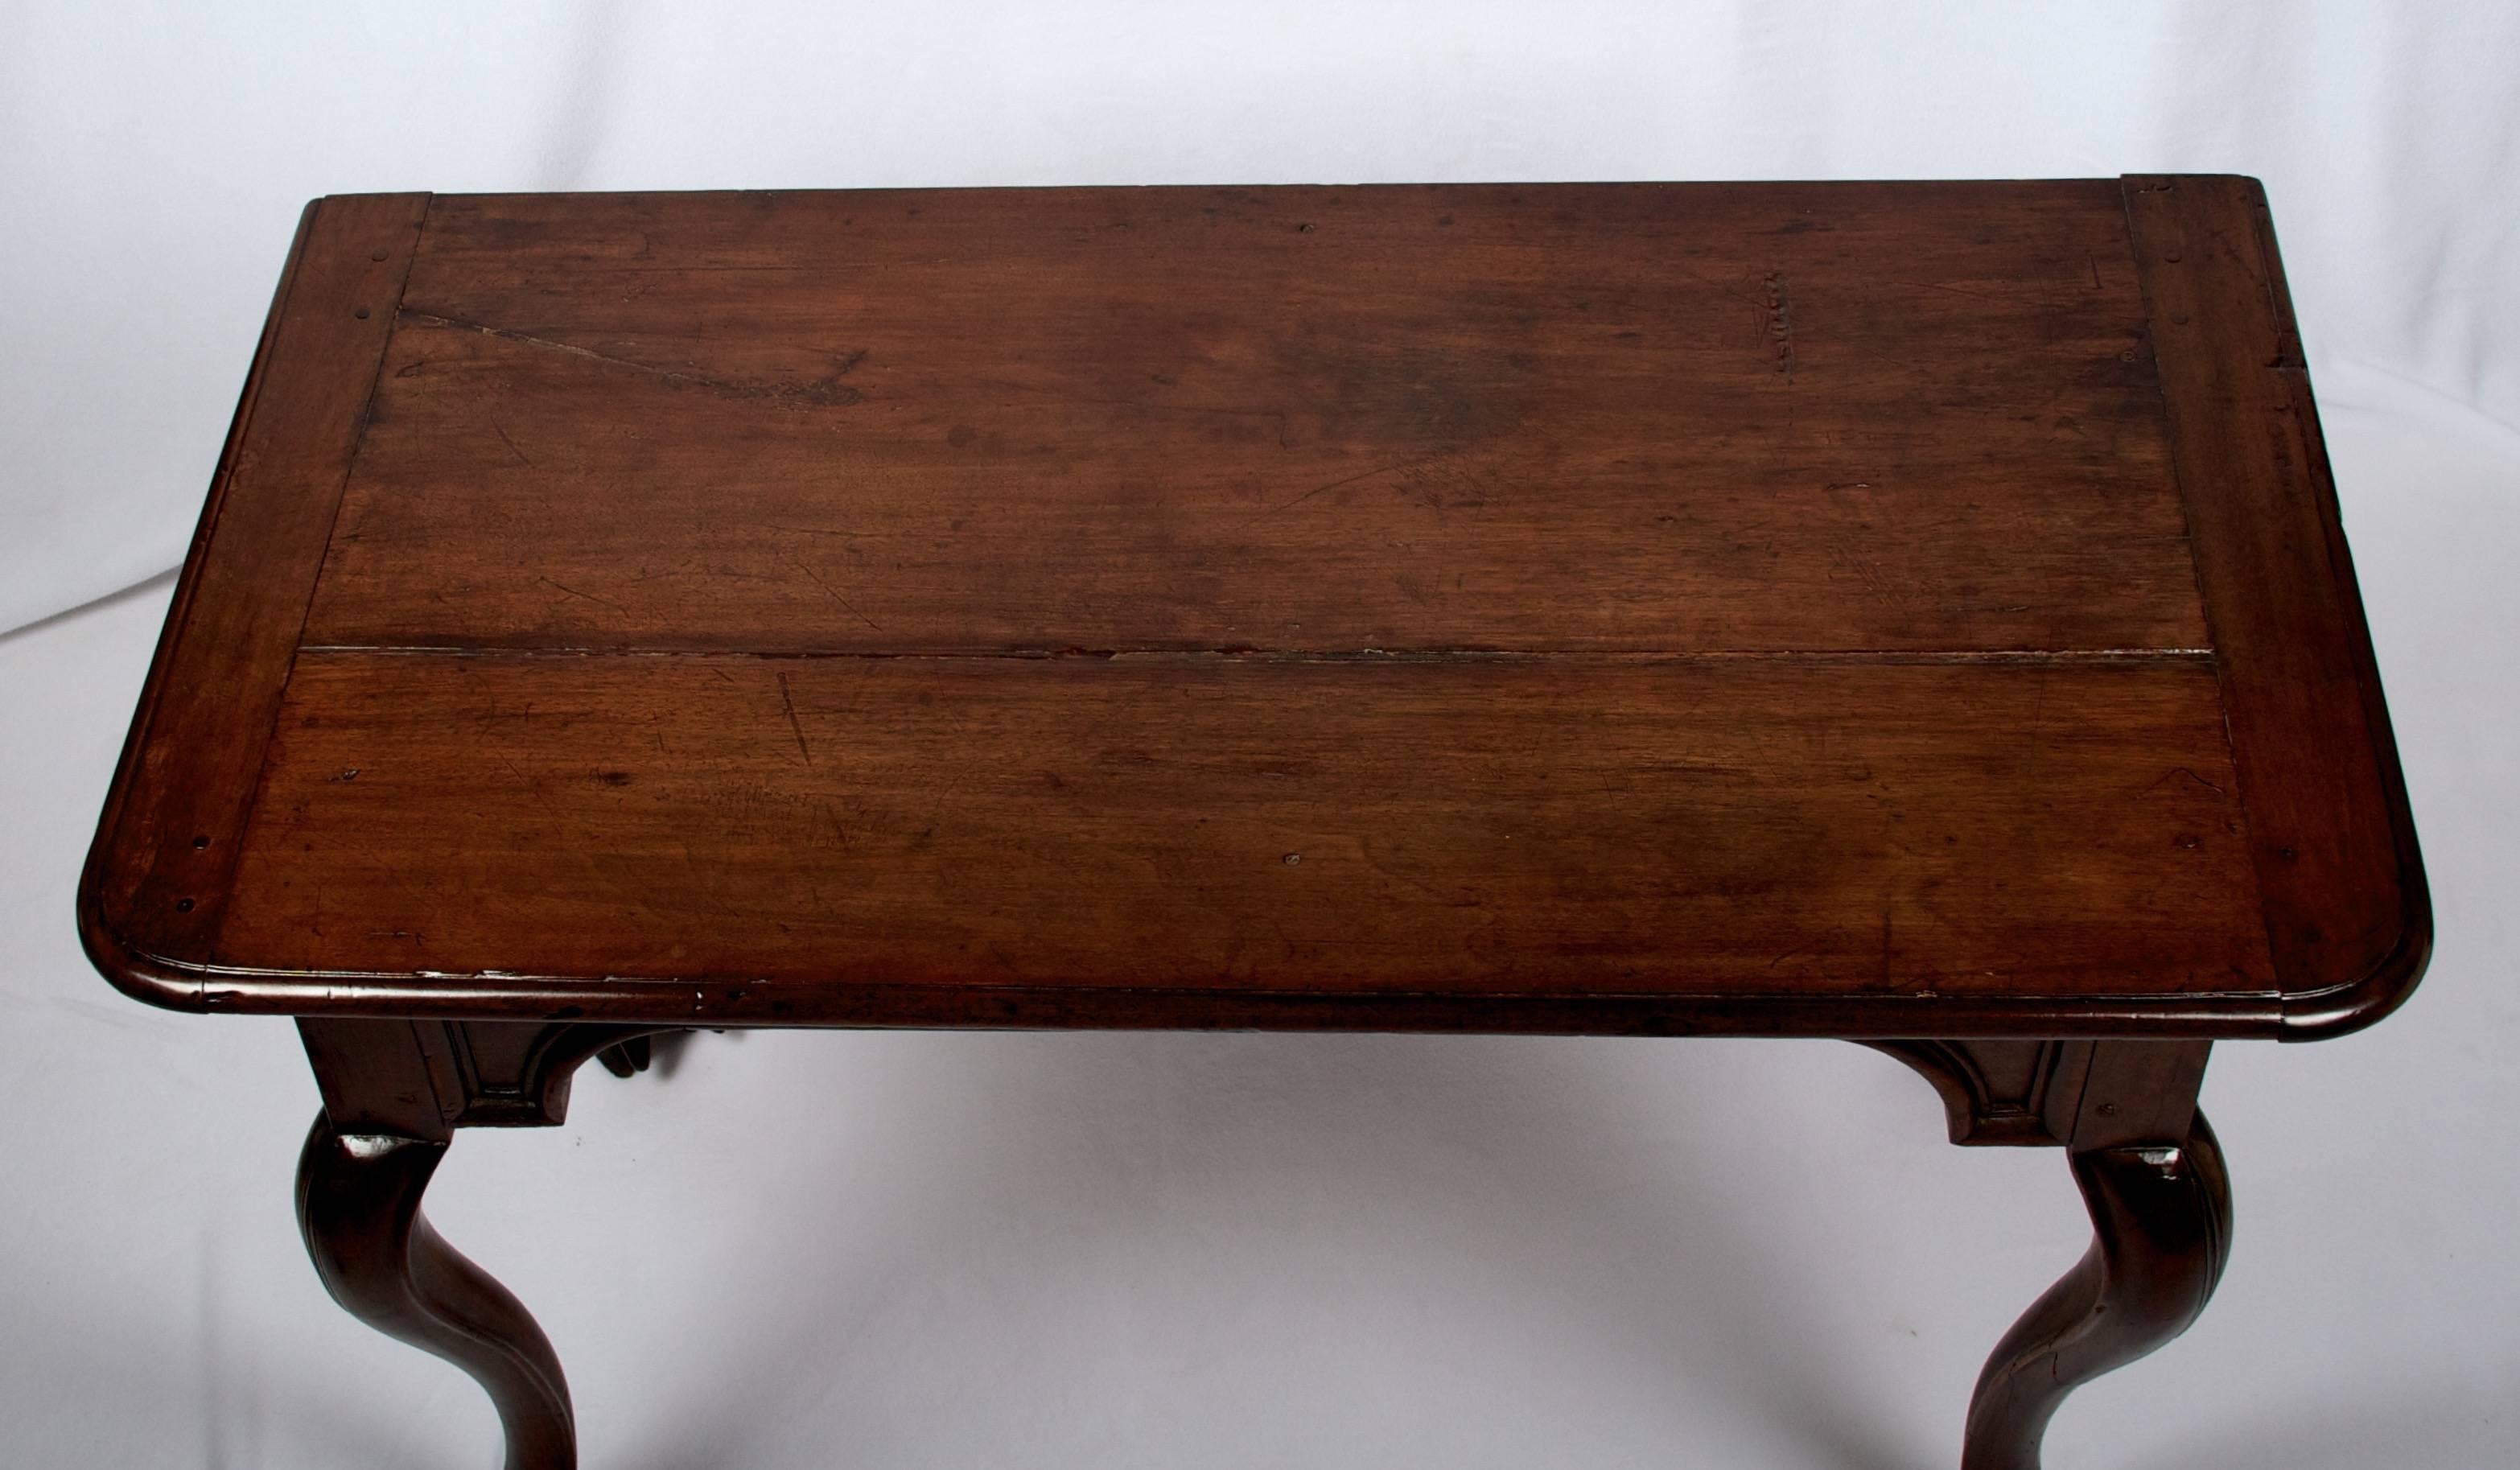 Hand-Carved Early 18th Century Regence Period Side Table with One Drawer